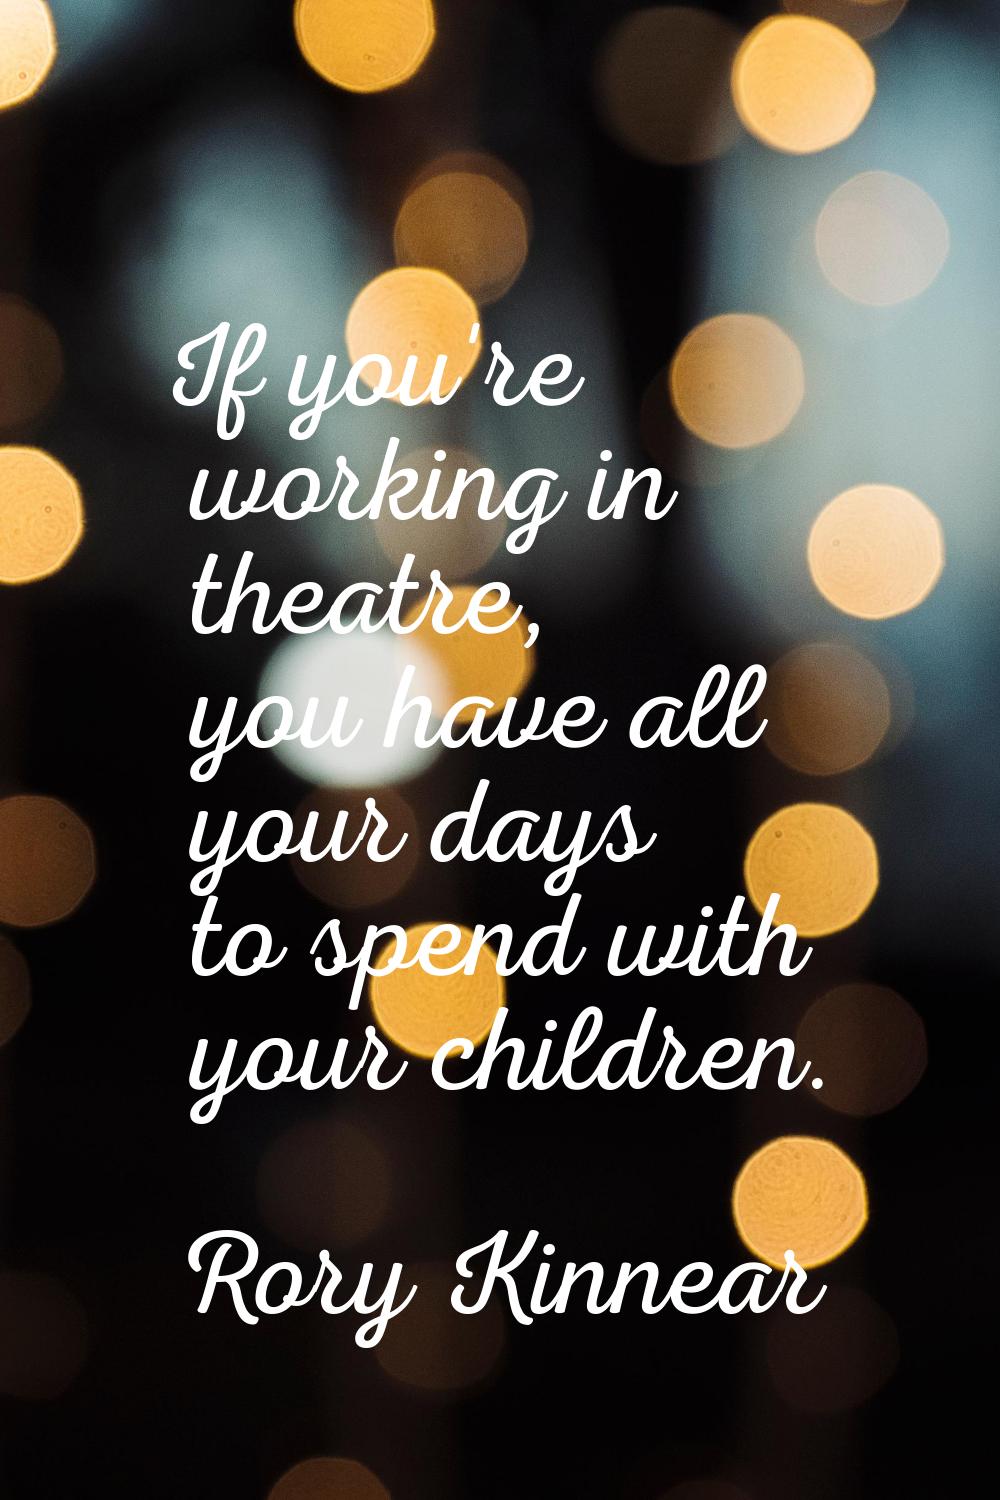 If you're working in theatre, you have all your days to spend with your children.